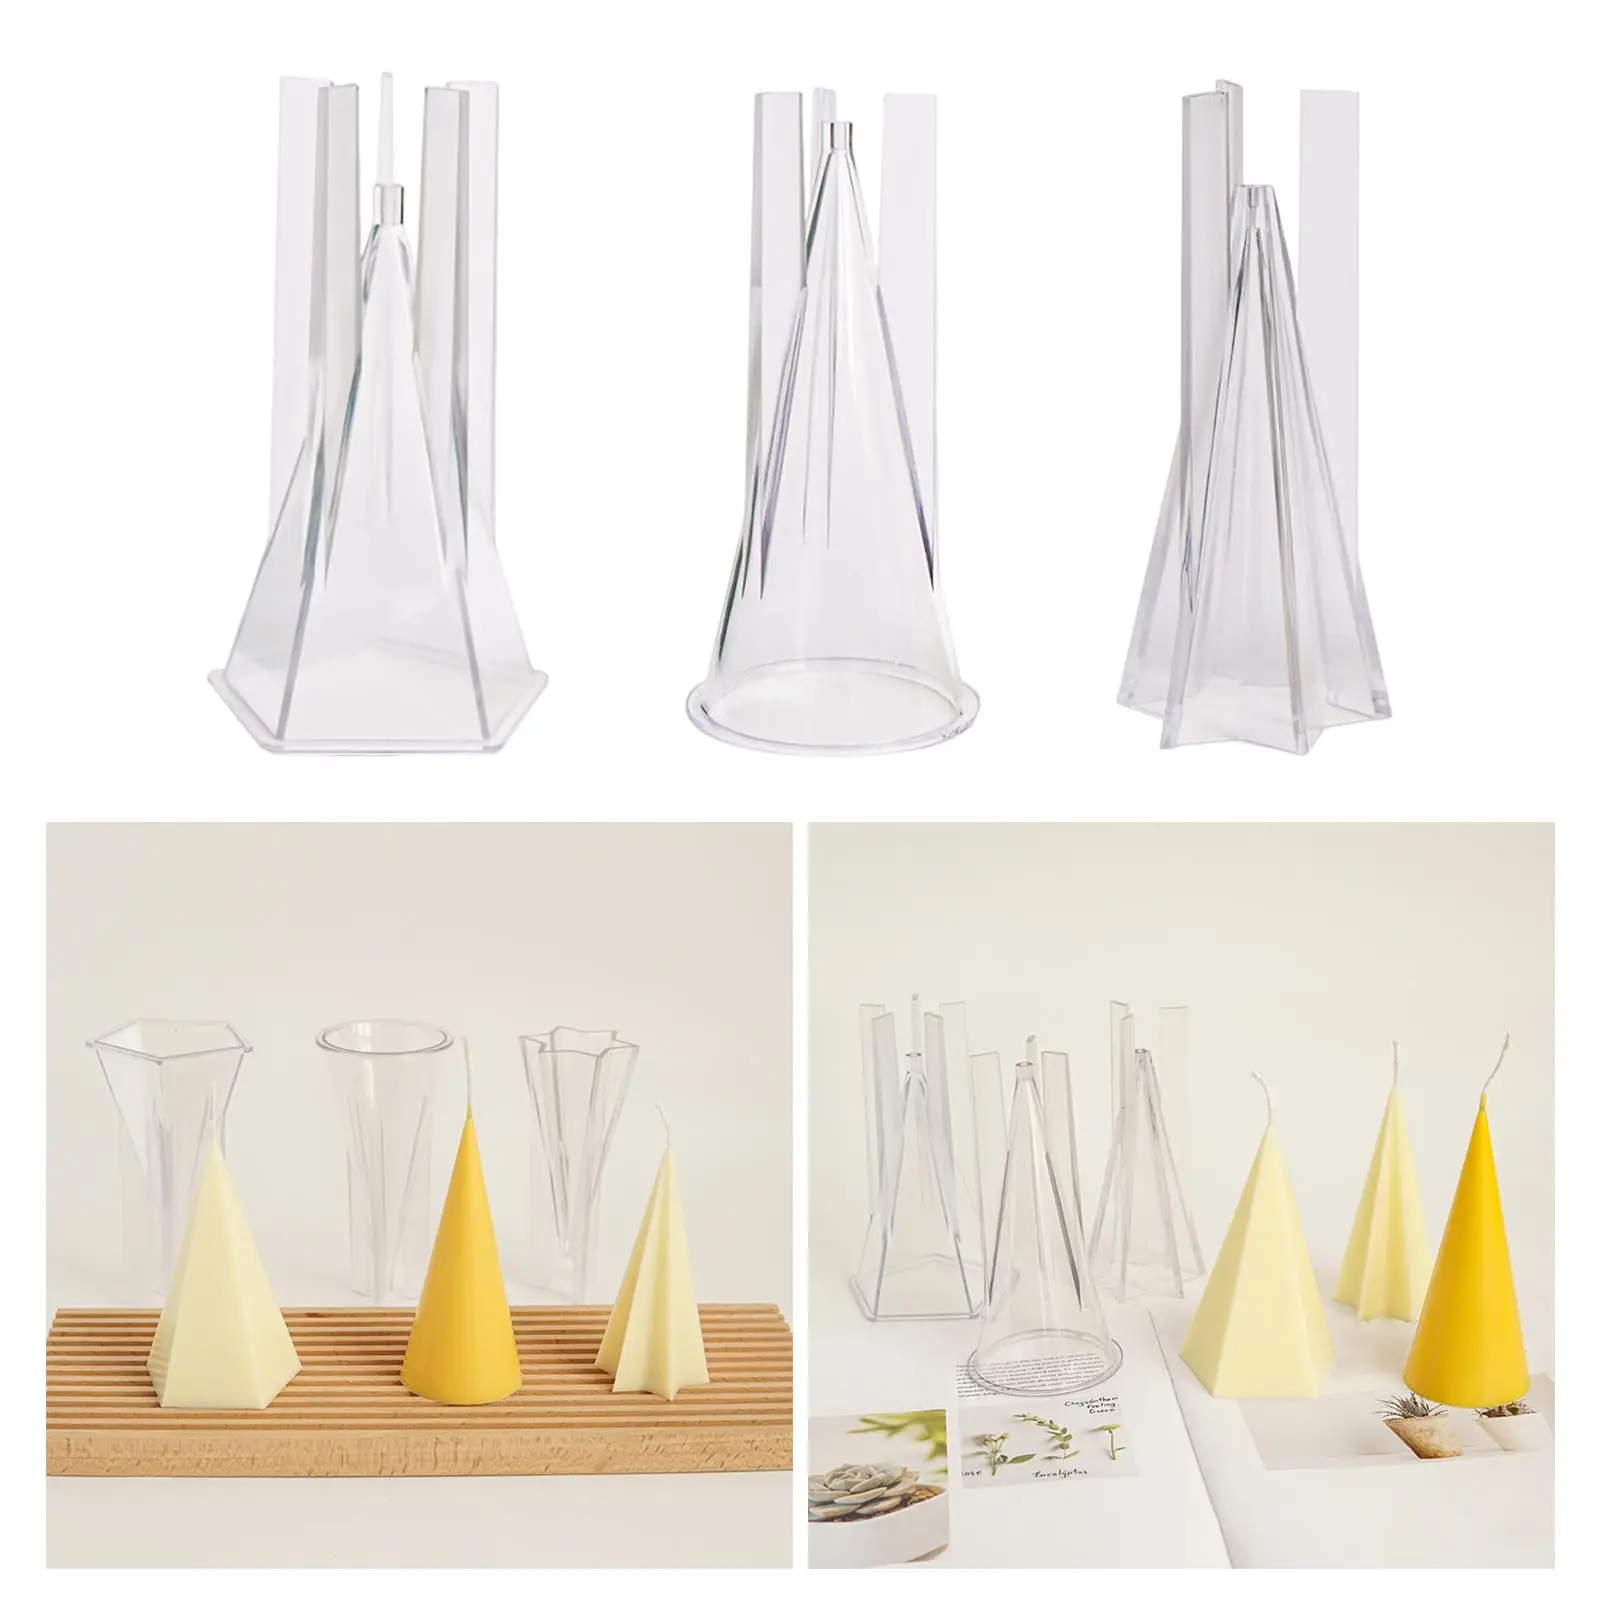 Cone Candle Mold Tool Clear Wax Candle Making Resin Casting Figurines Home Decoration Polymer Clay 6-sided Cone Candles Making